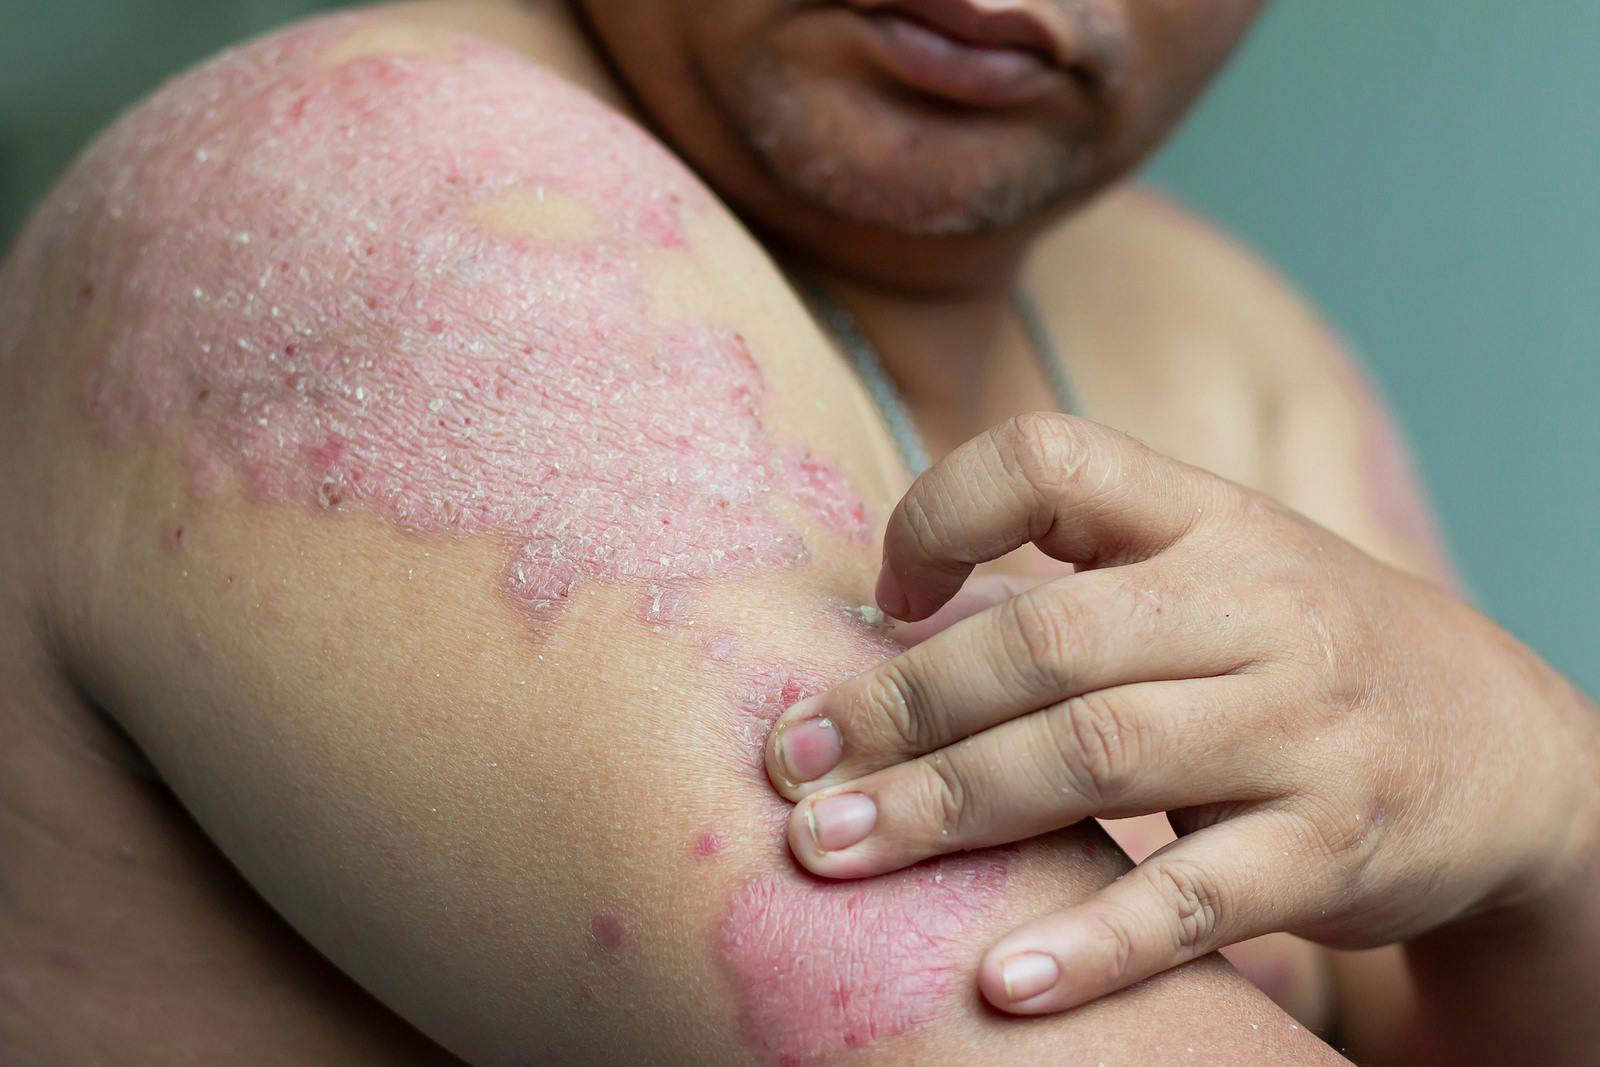 A person with psoriasis on his arm who can't afford Otezla